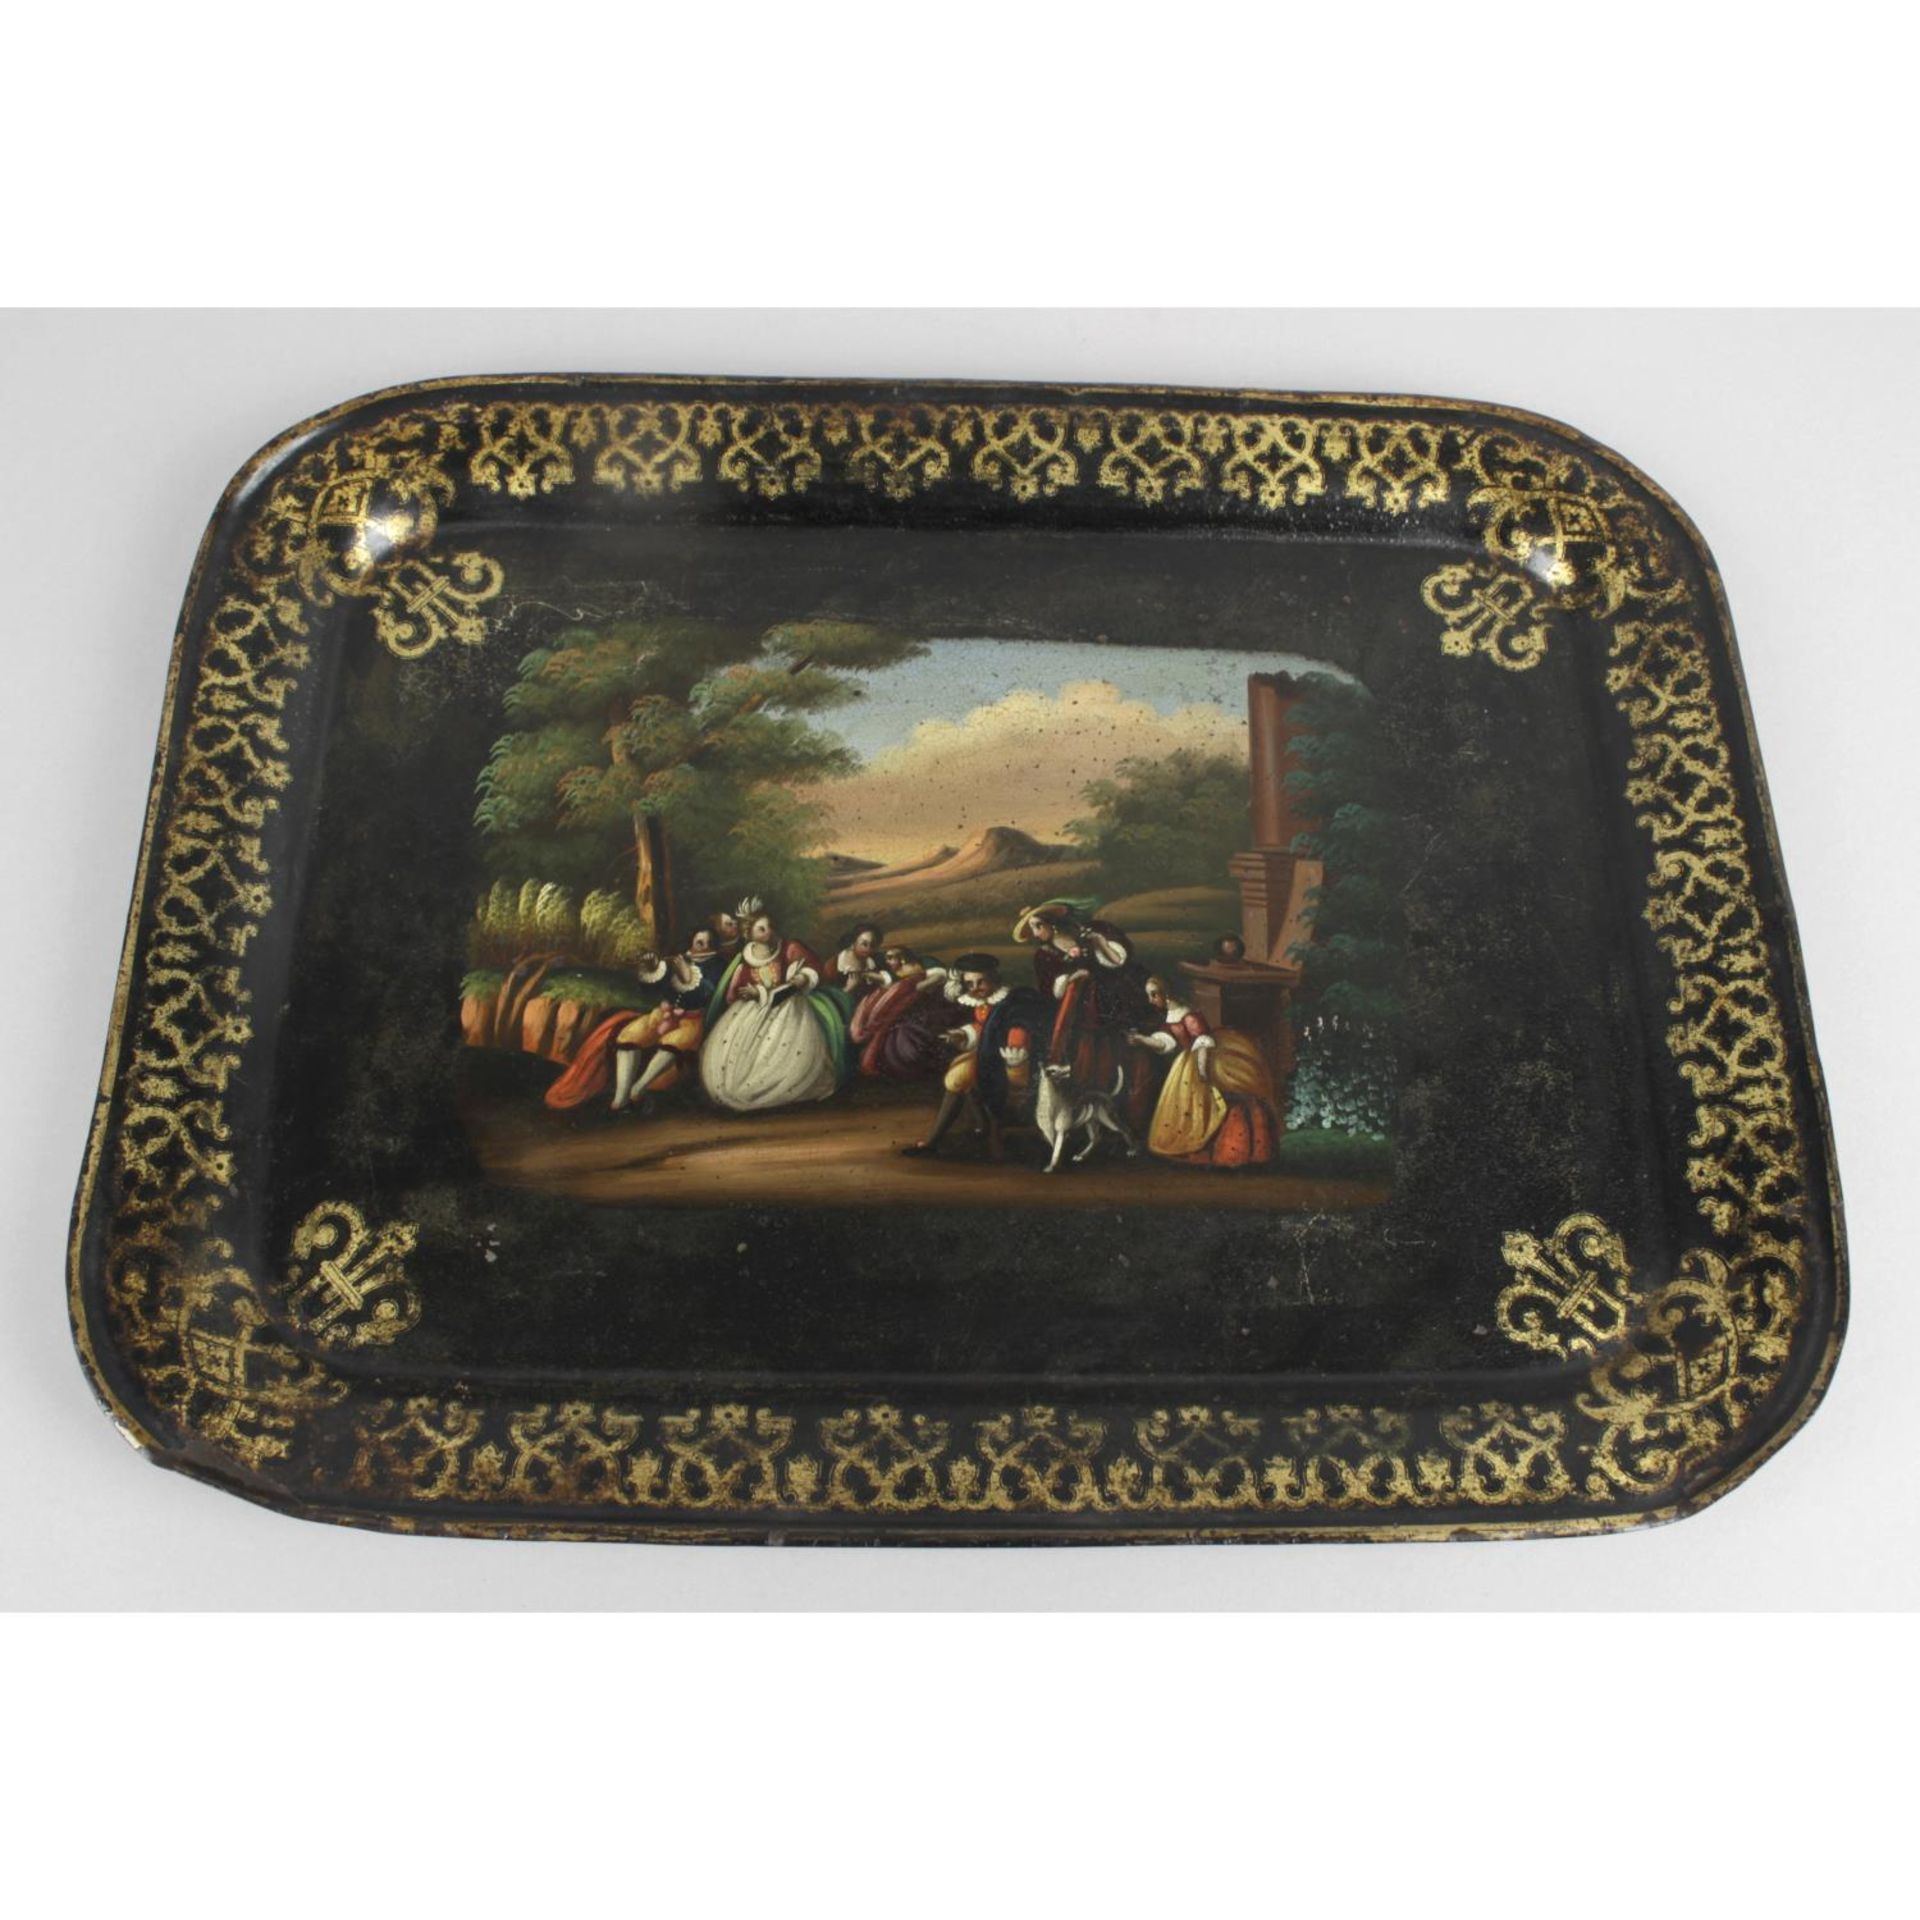 A late nineteenth century Toleware rectangular metal tray with raised border.